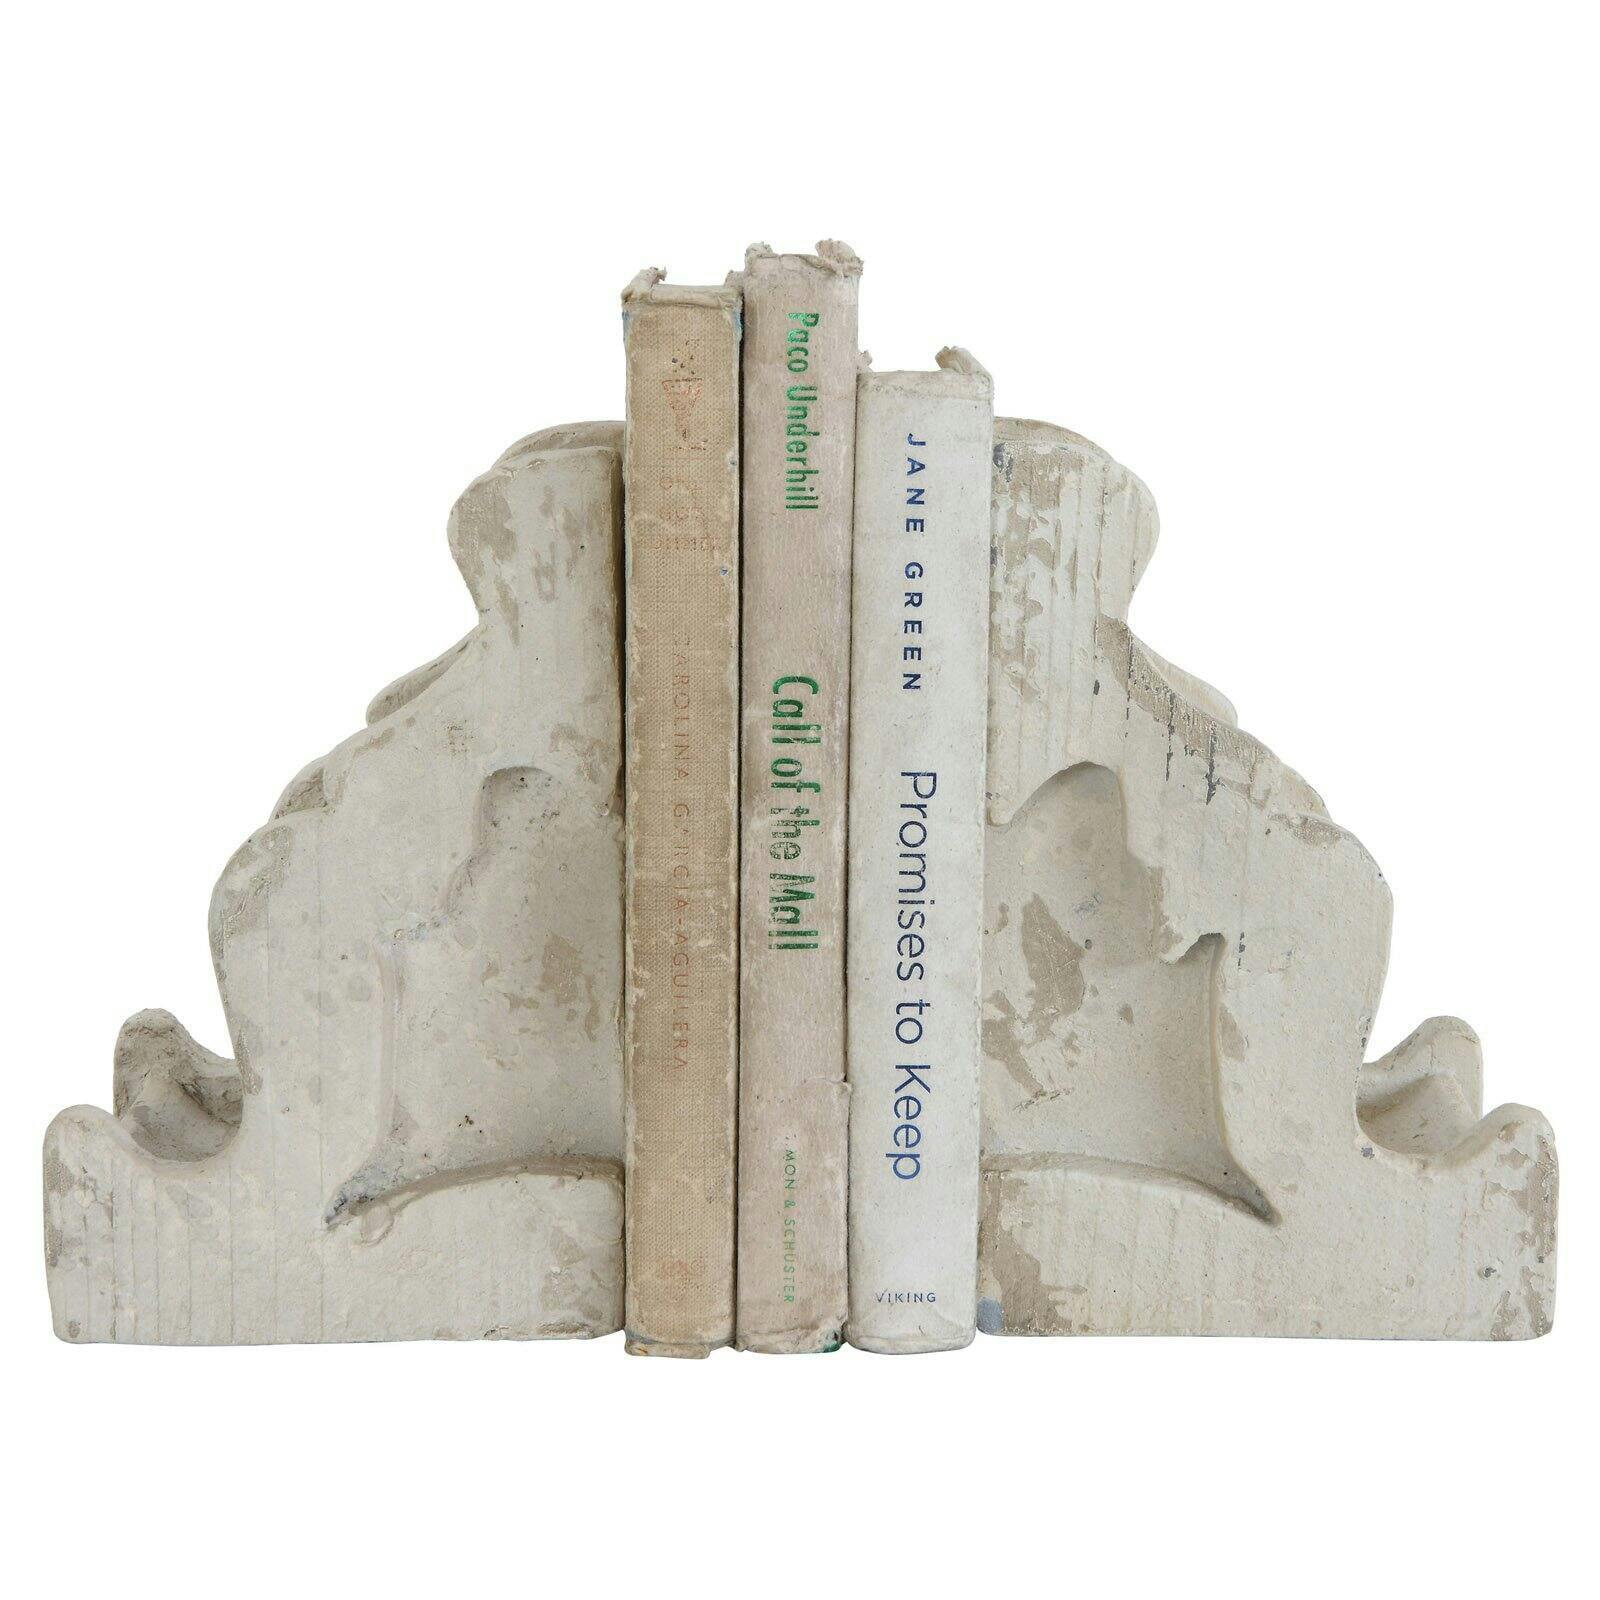 Vintage White Distressed Corbel Bookends - Set of 2